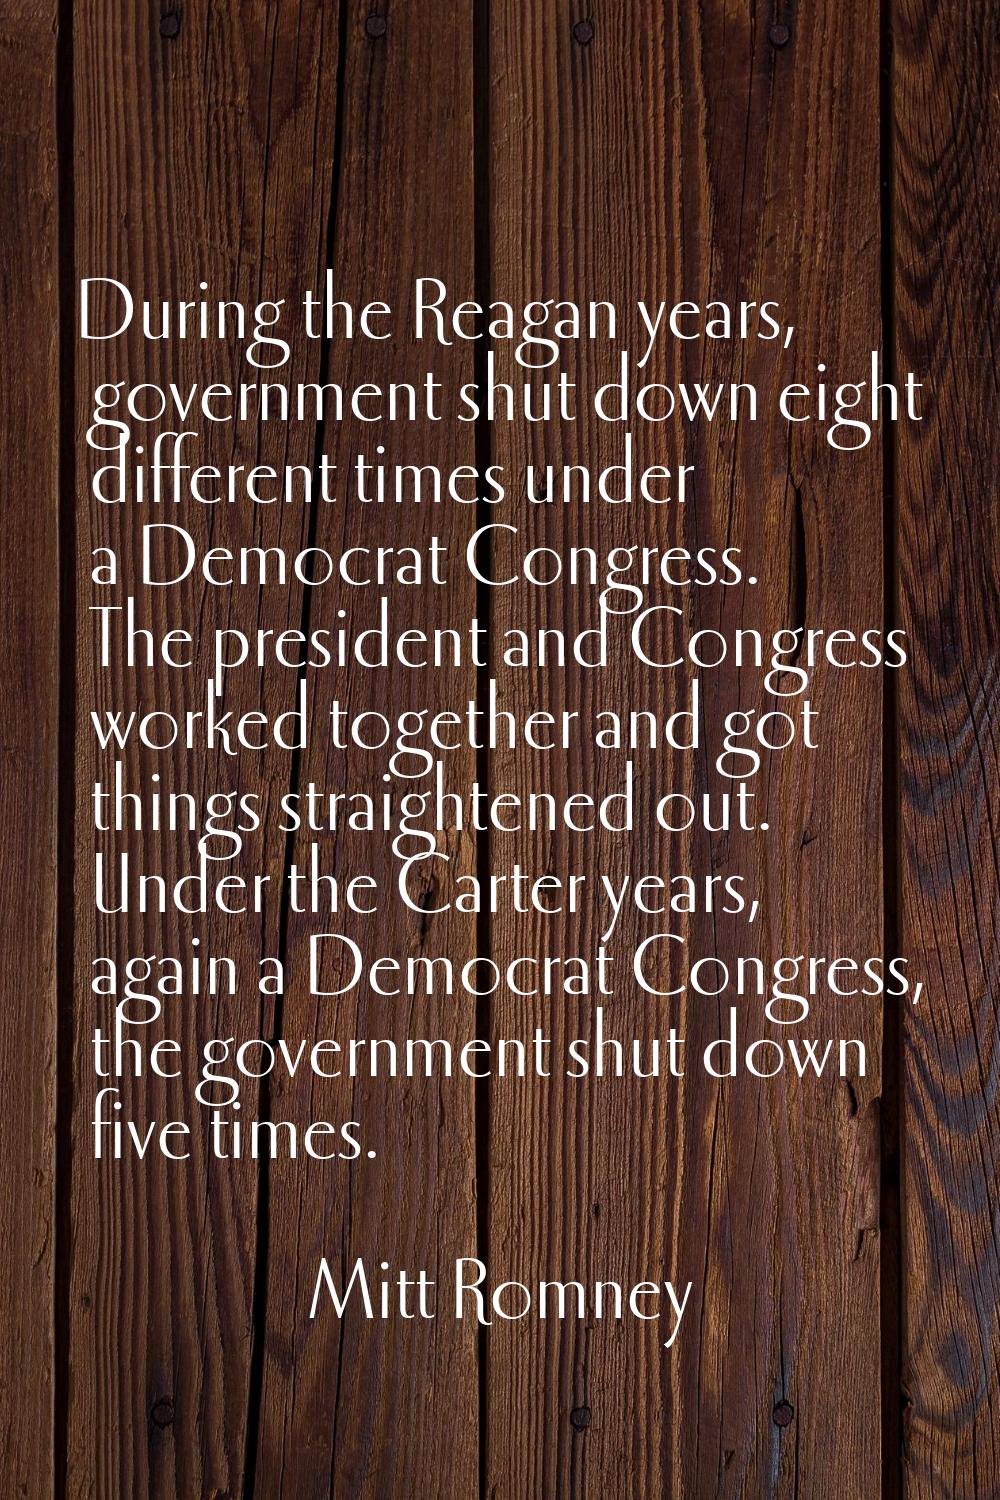 During the Reagan years, government shut down eight different times under a Democrat Congress. The 